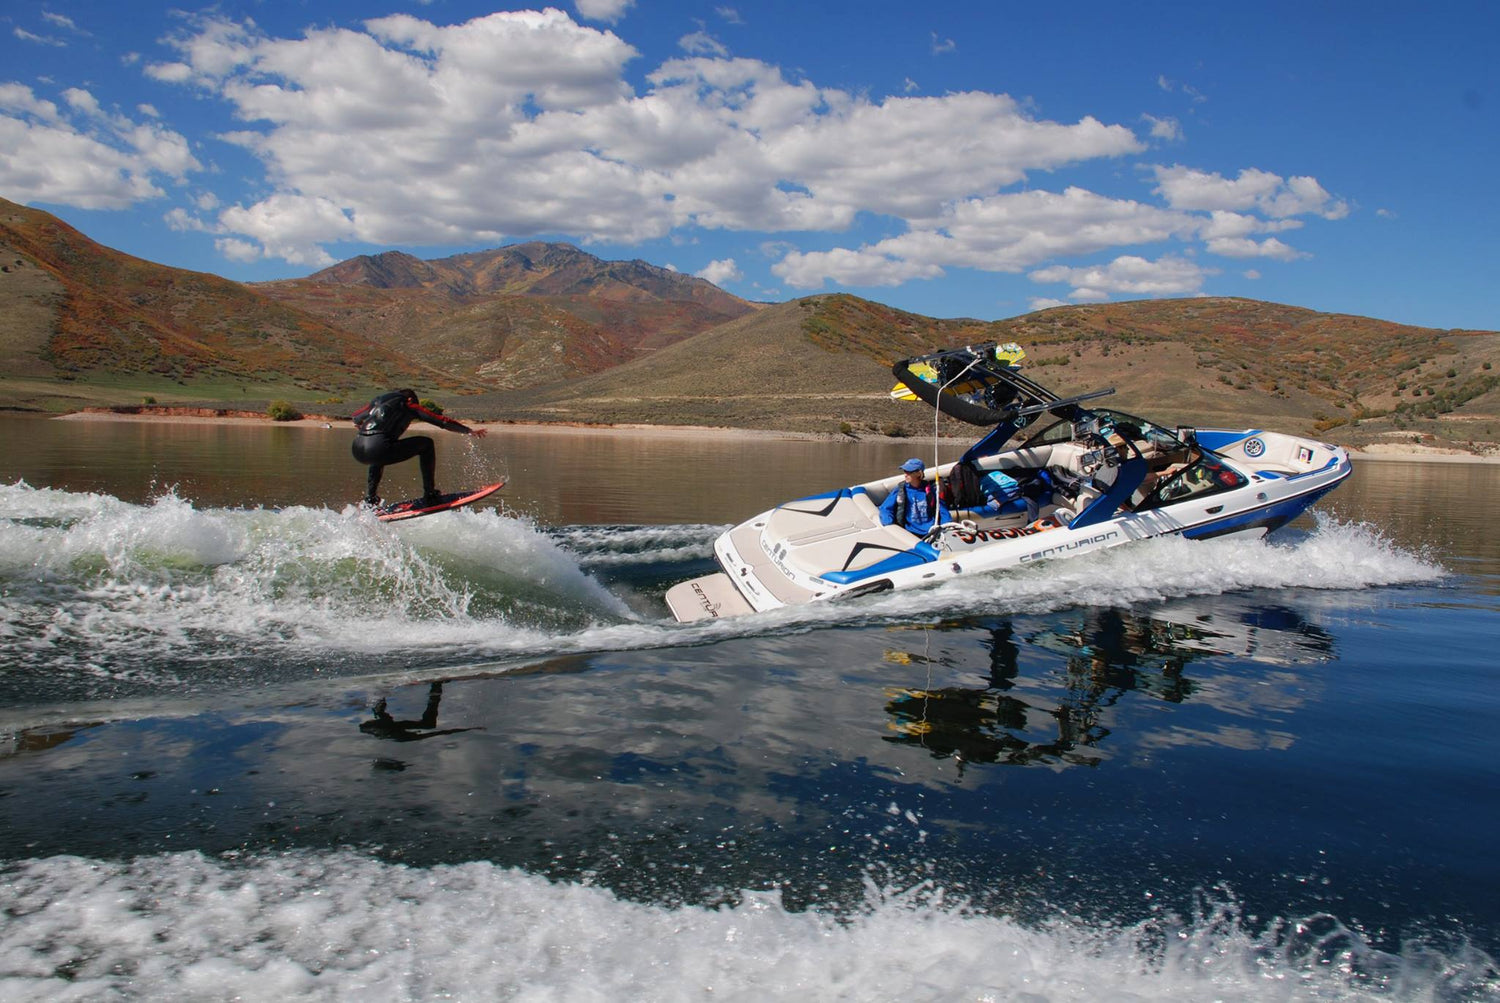 Wakesurf on Lake Powell with a Centruion SV233 boat rental